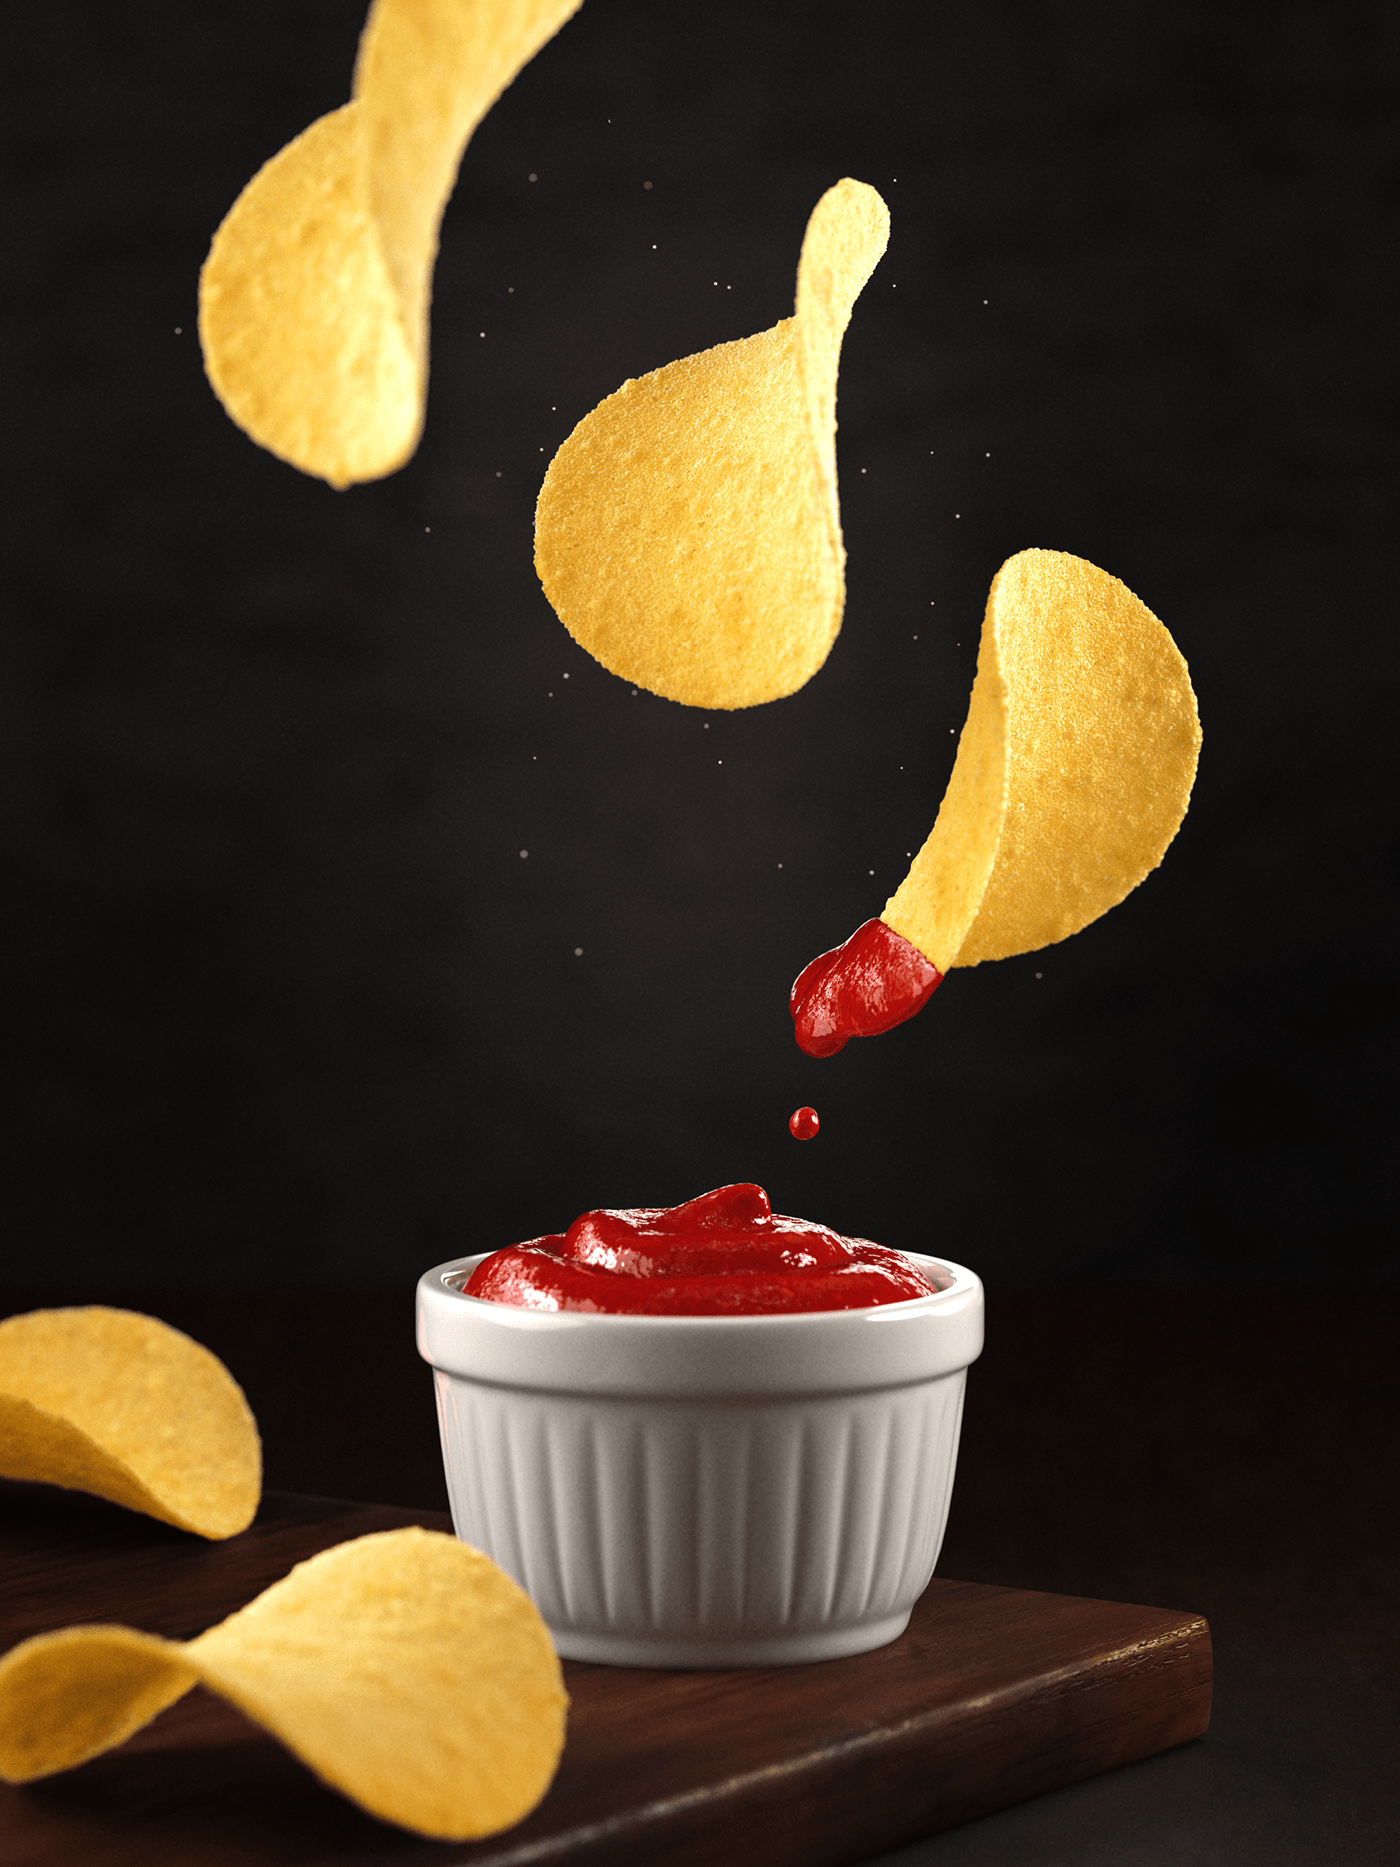 Flavio pringles chips Fries snack 3D product visualization food photography FMCG Cordeiro